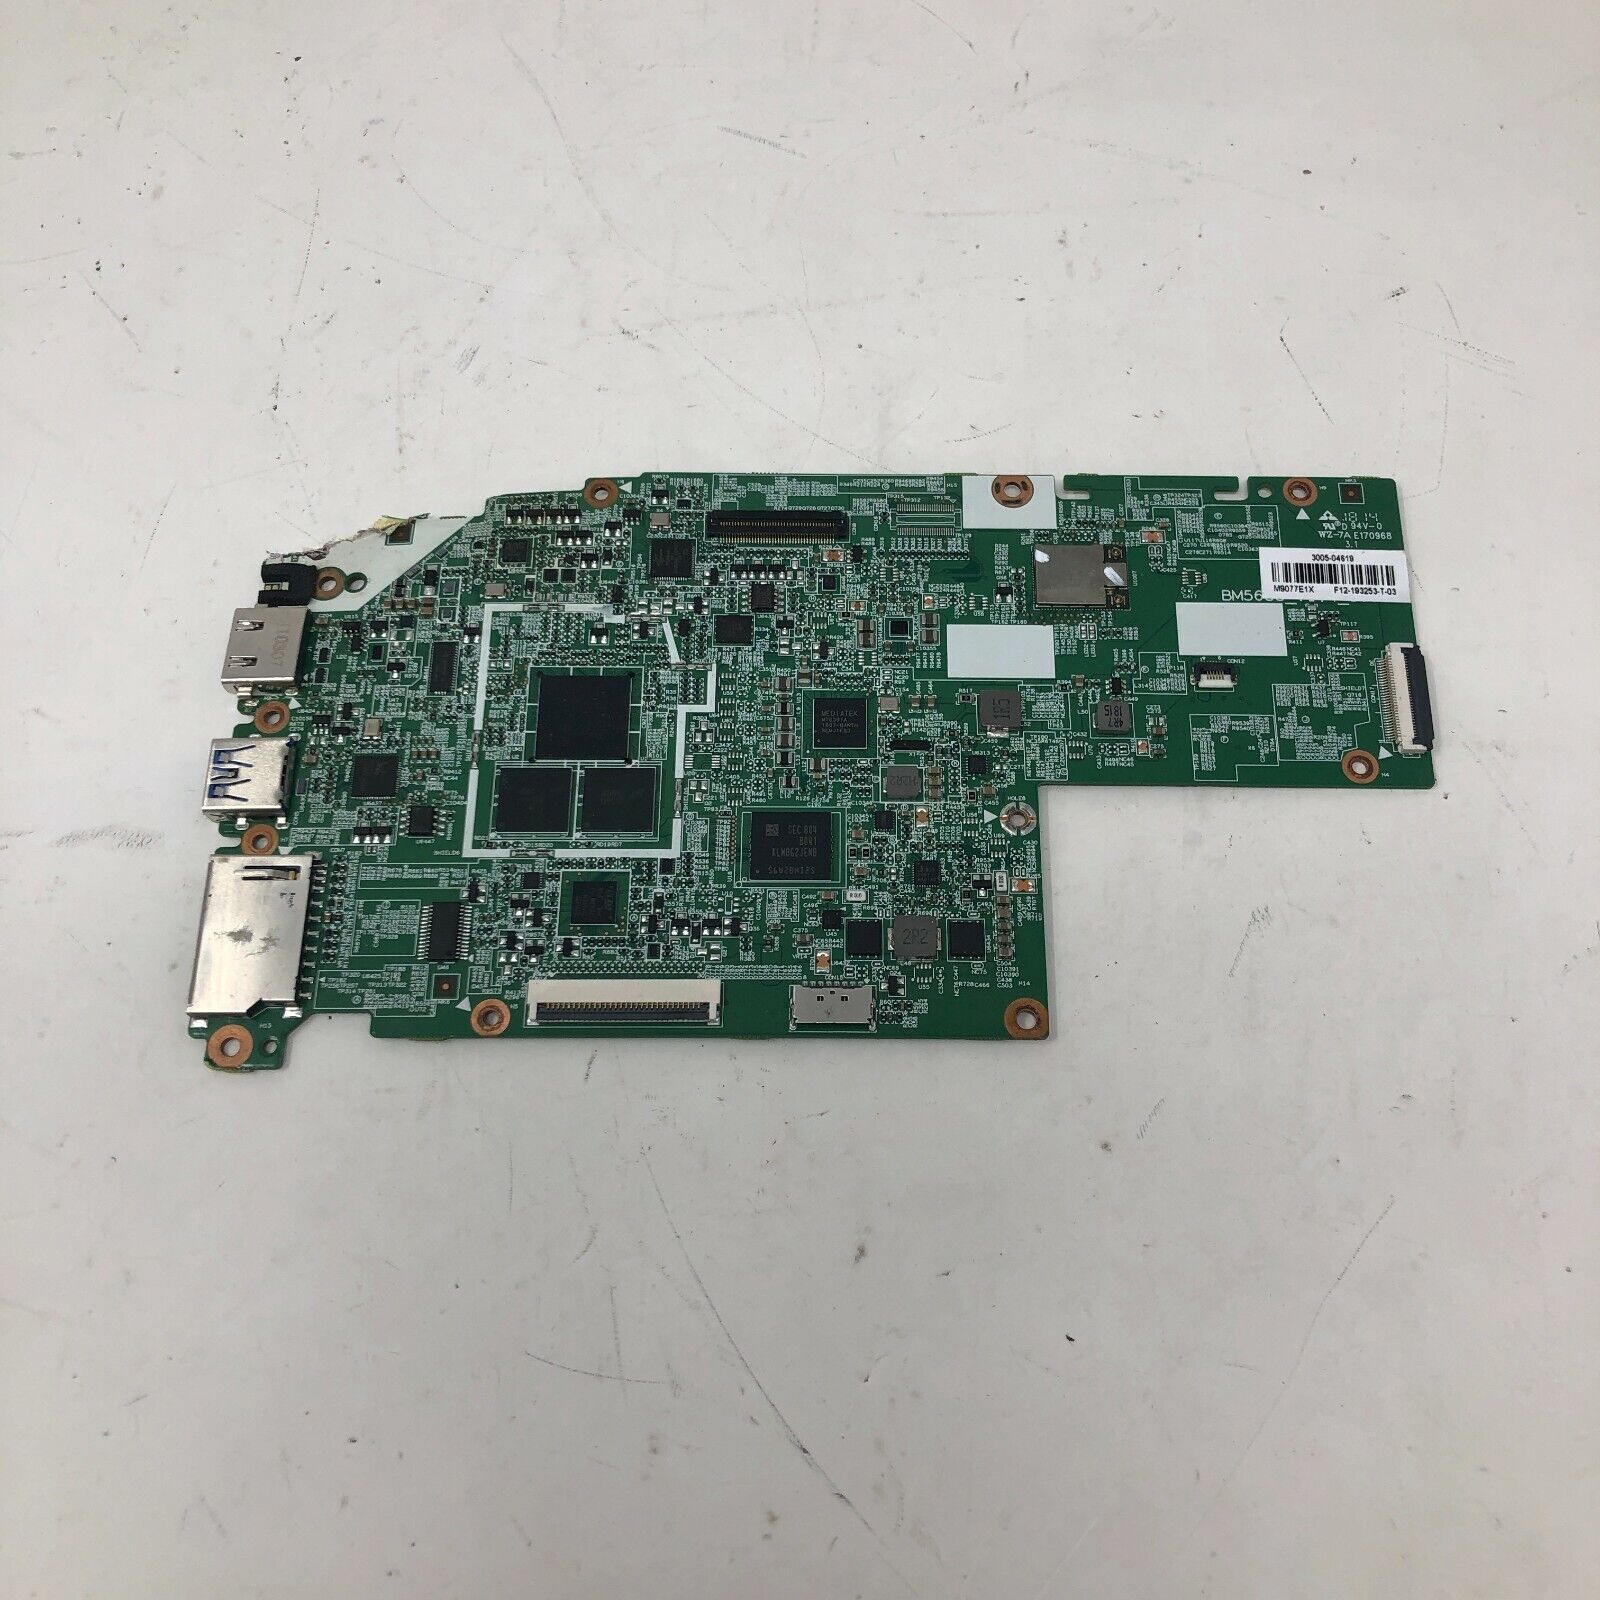 LENOVO 300G - Damaged - For Parts Only